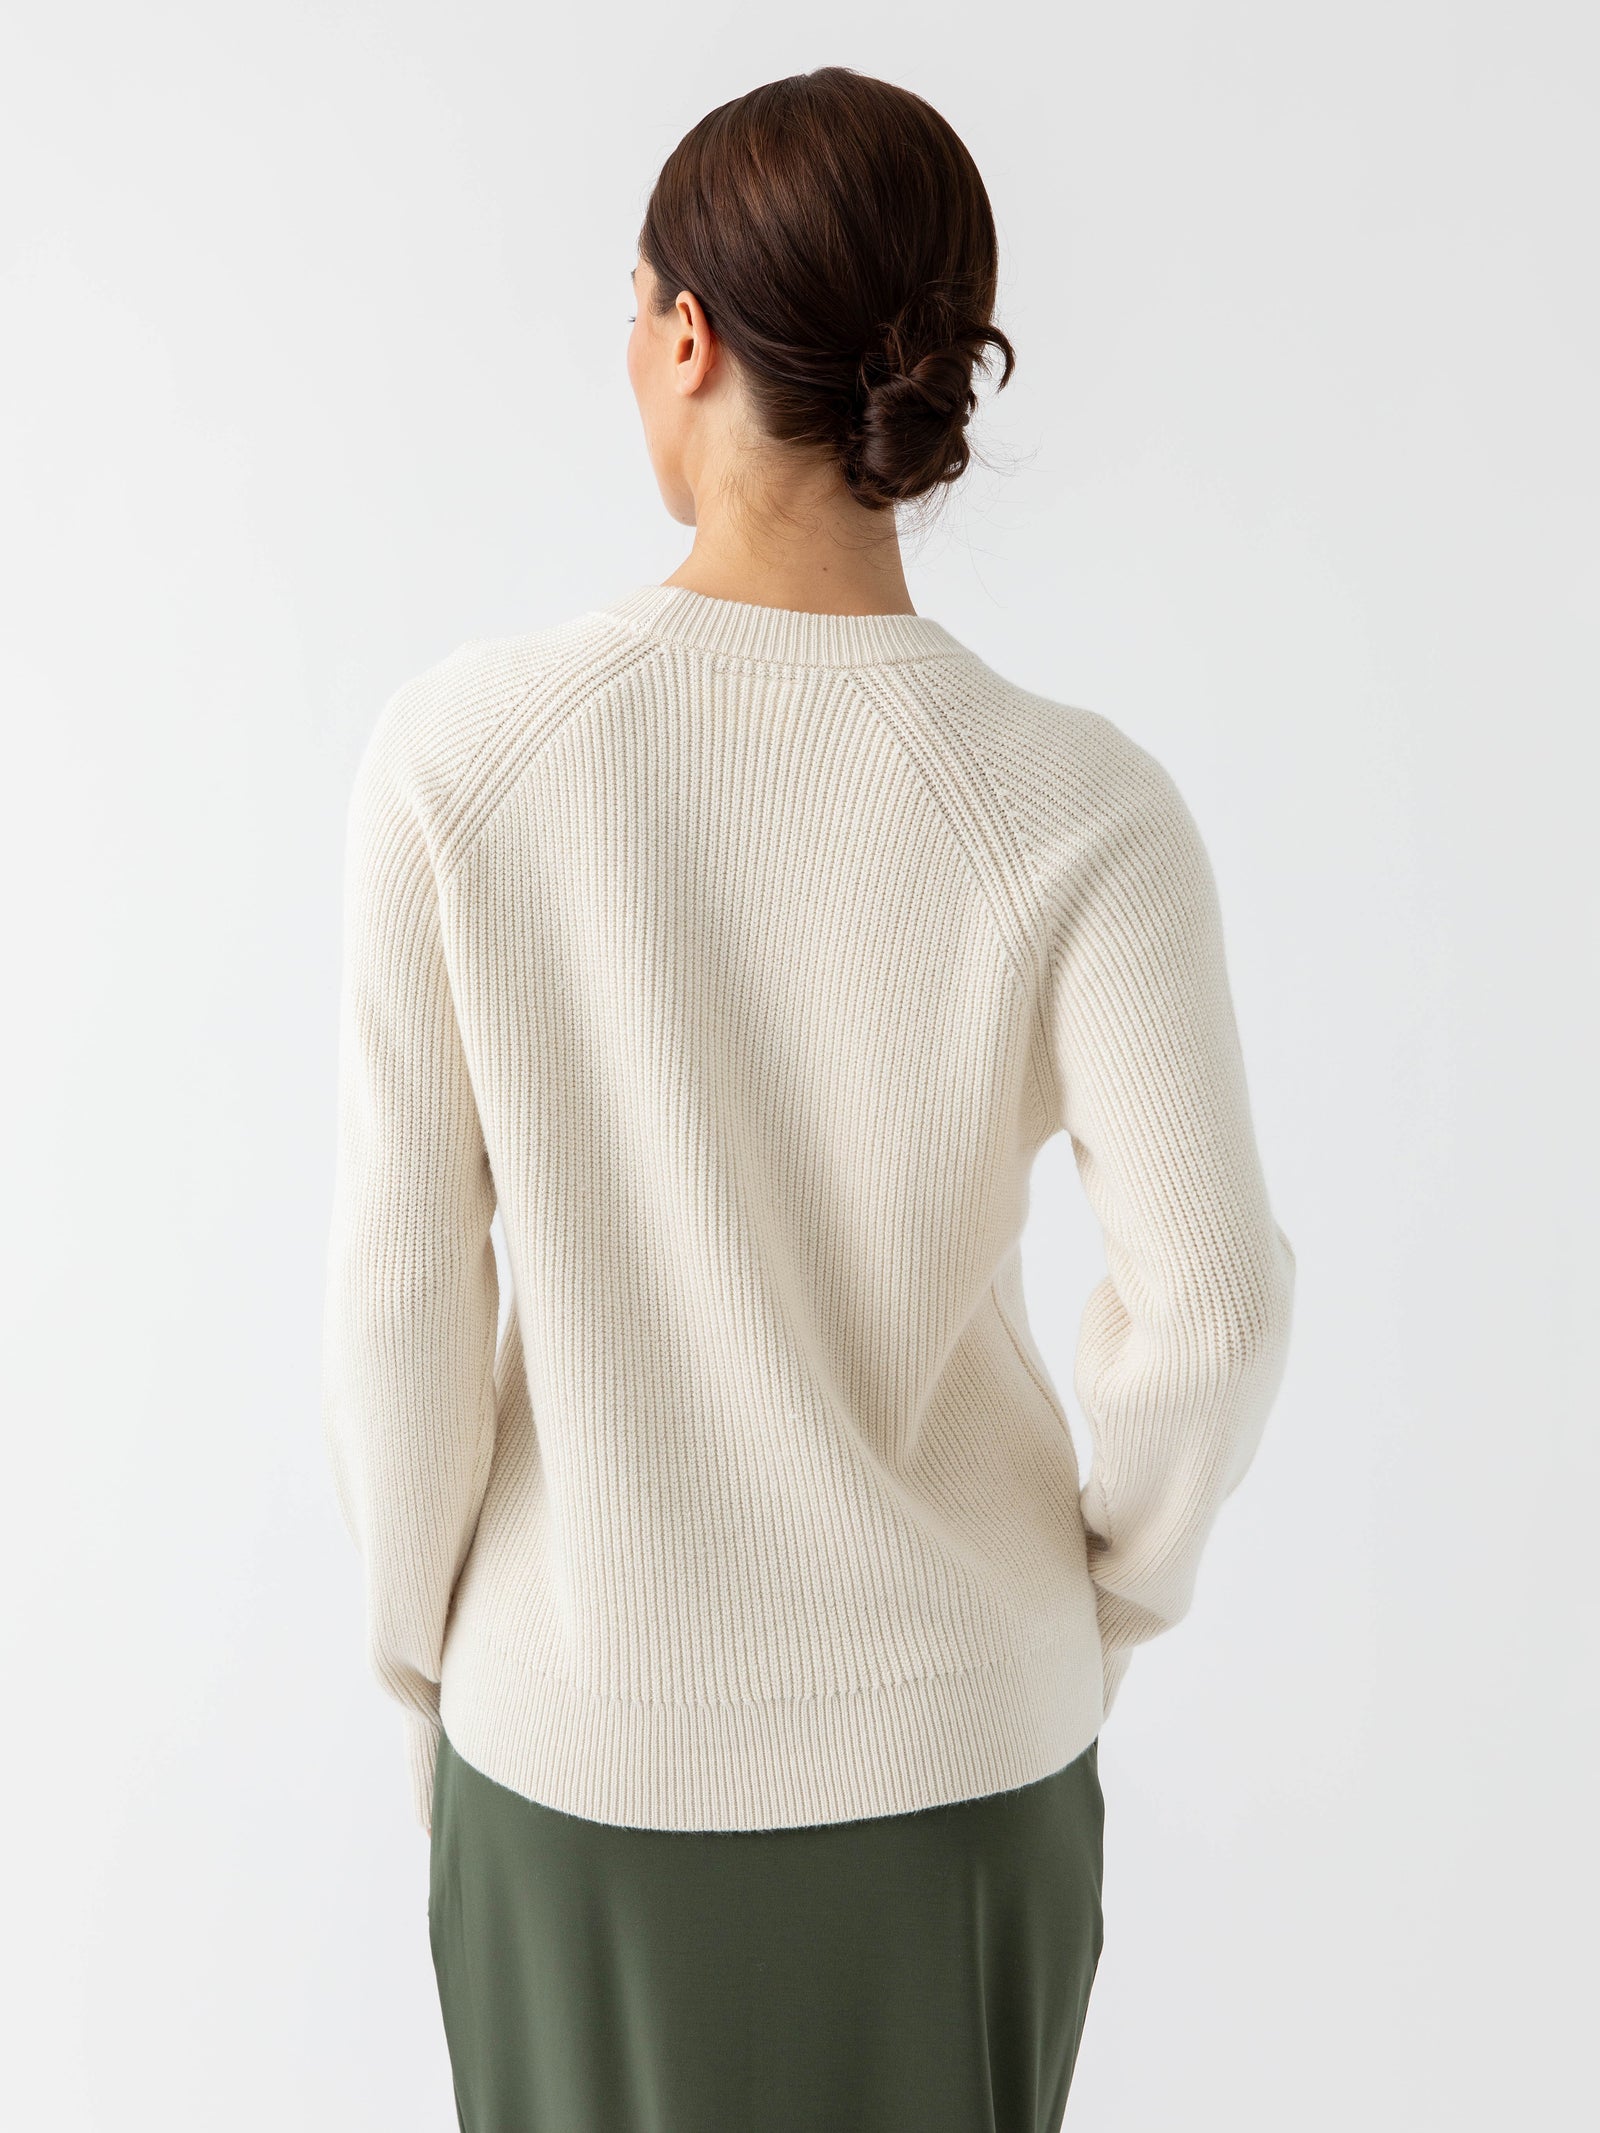 Back of woman wearing alabaster classic crewneck with white background 